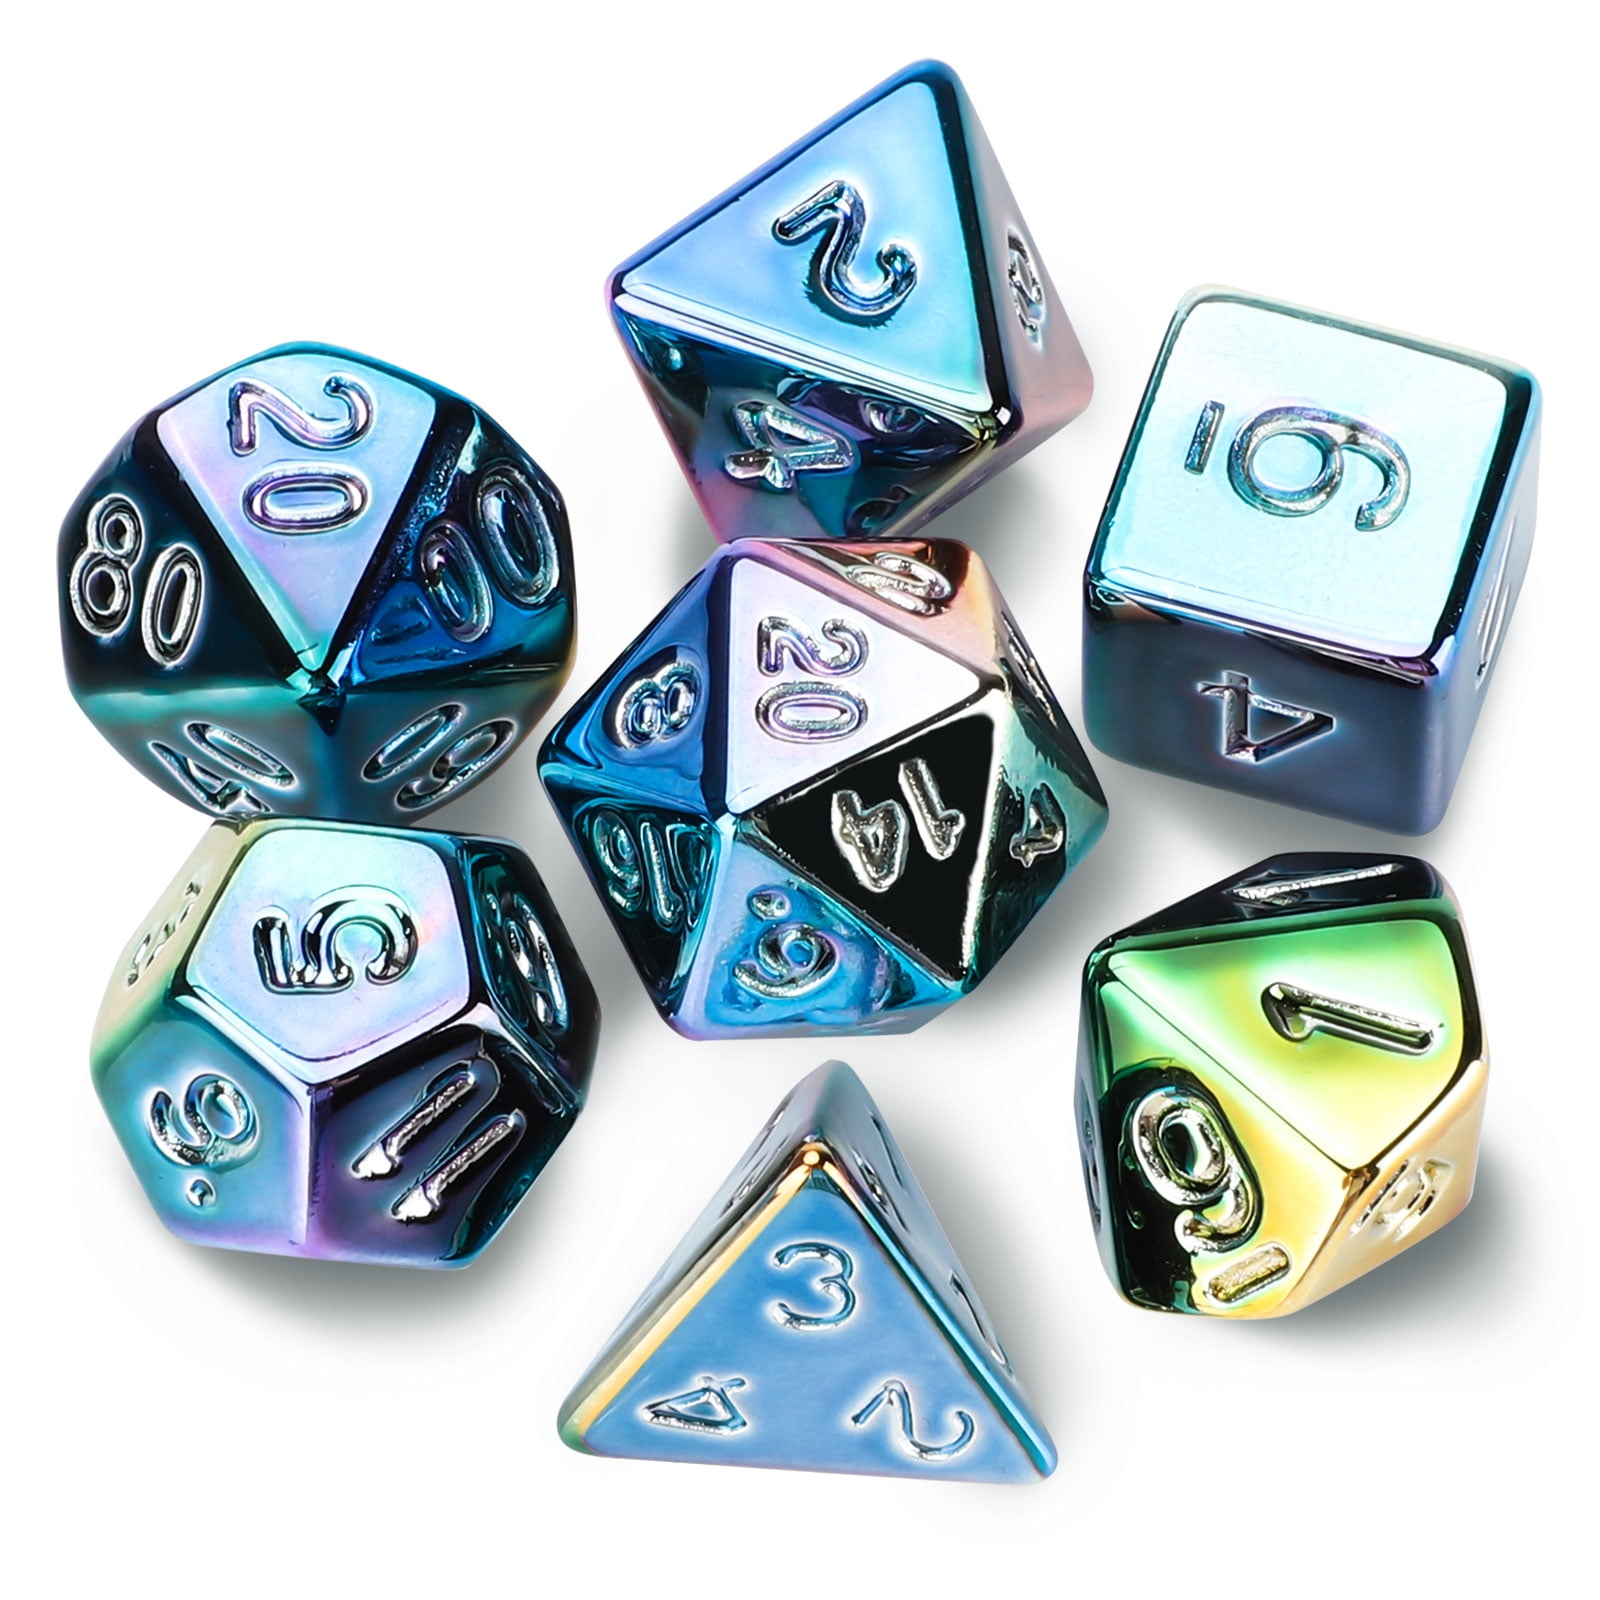 Dice Set for DND Game, TSV 7Pcs Polyhedral Dice Colorful Board Game Dice Co...